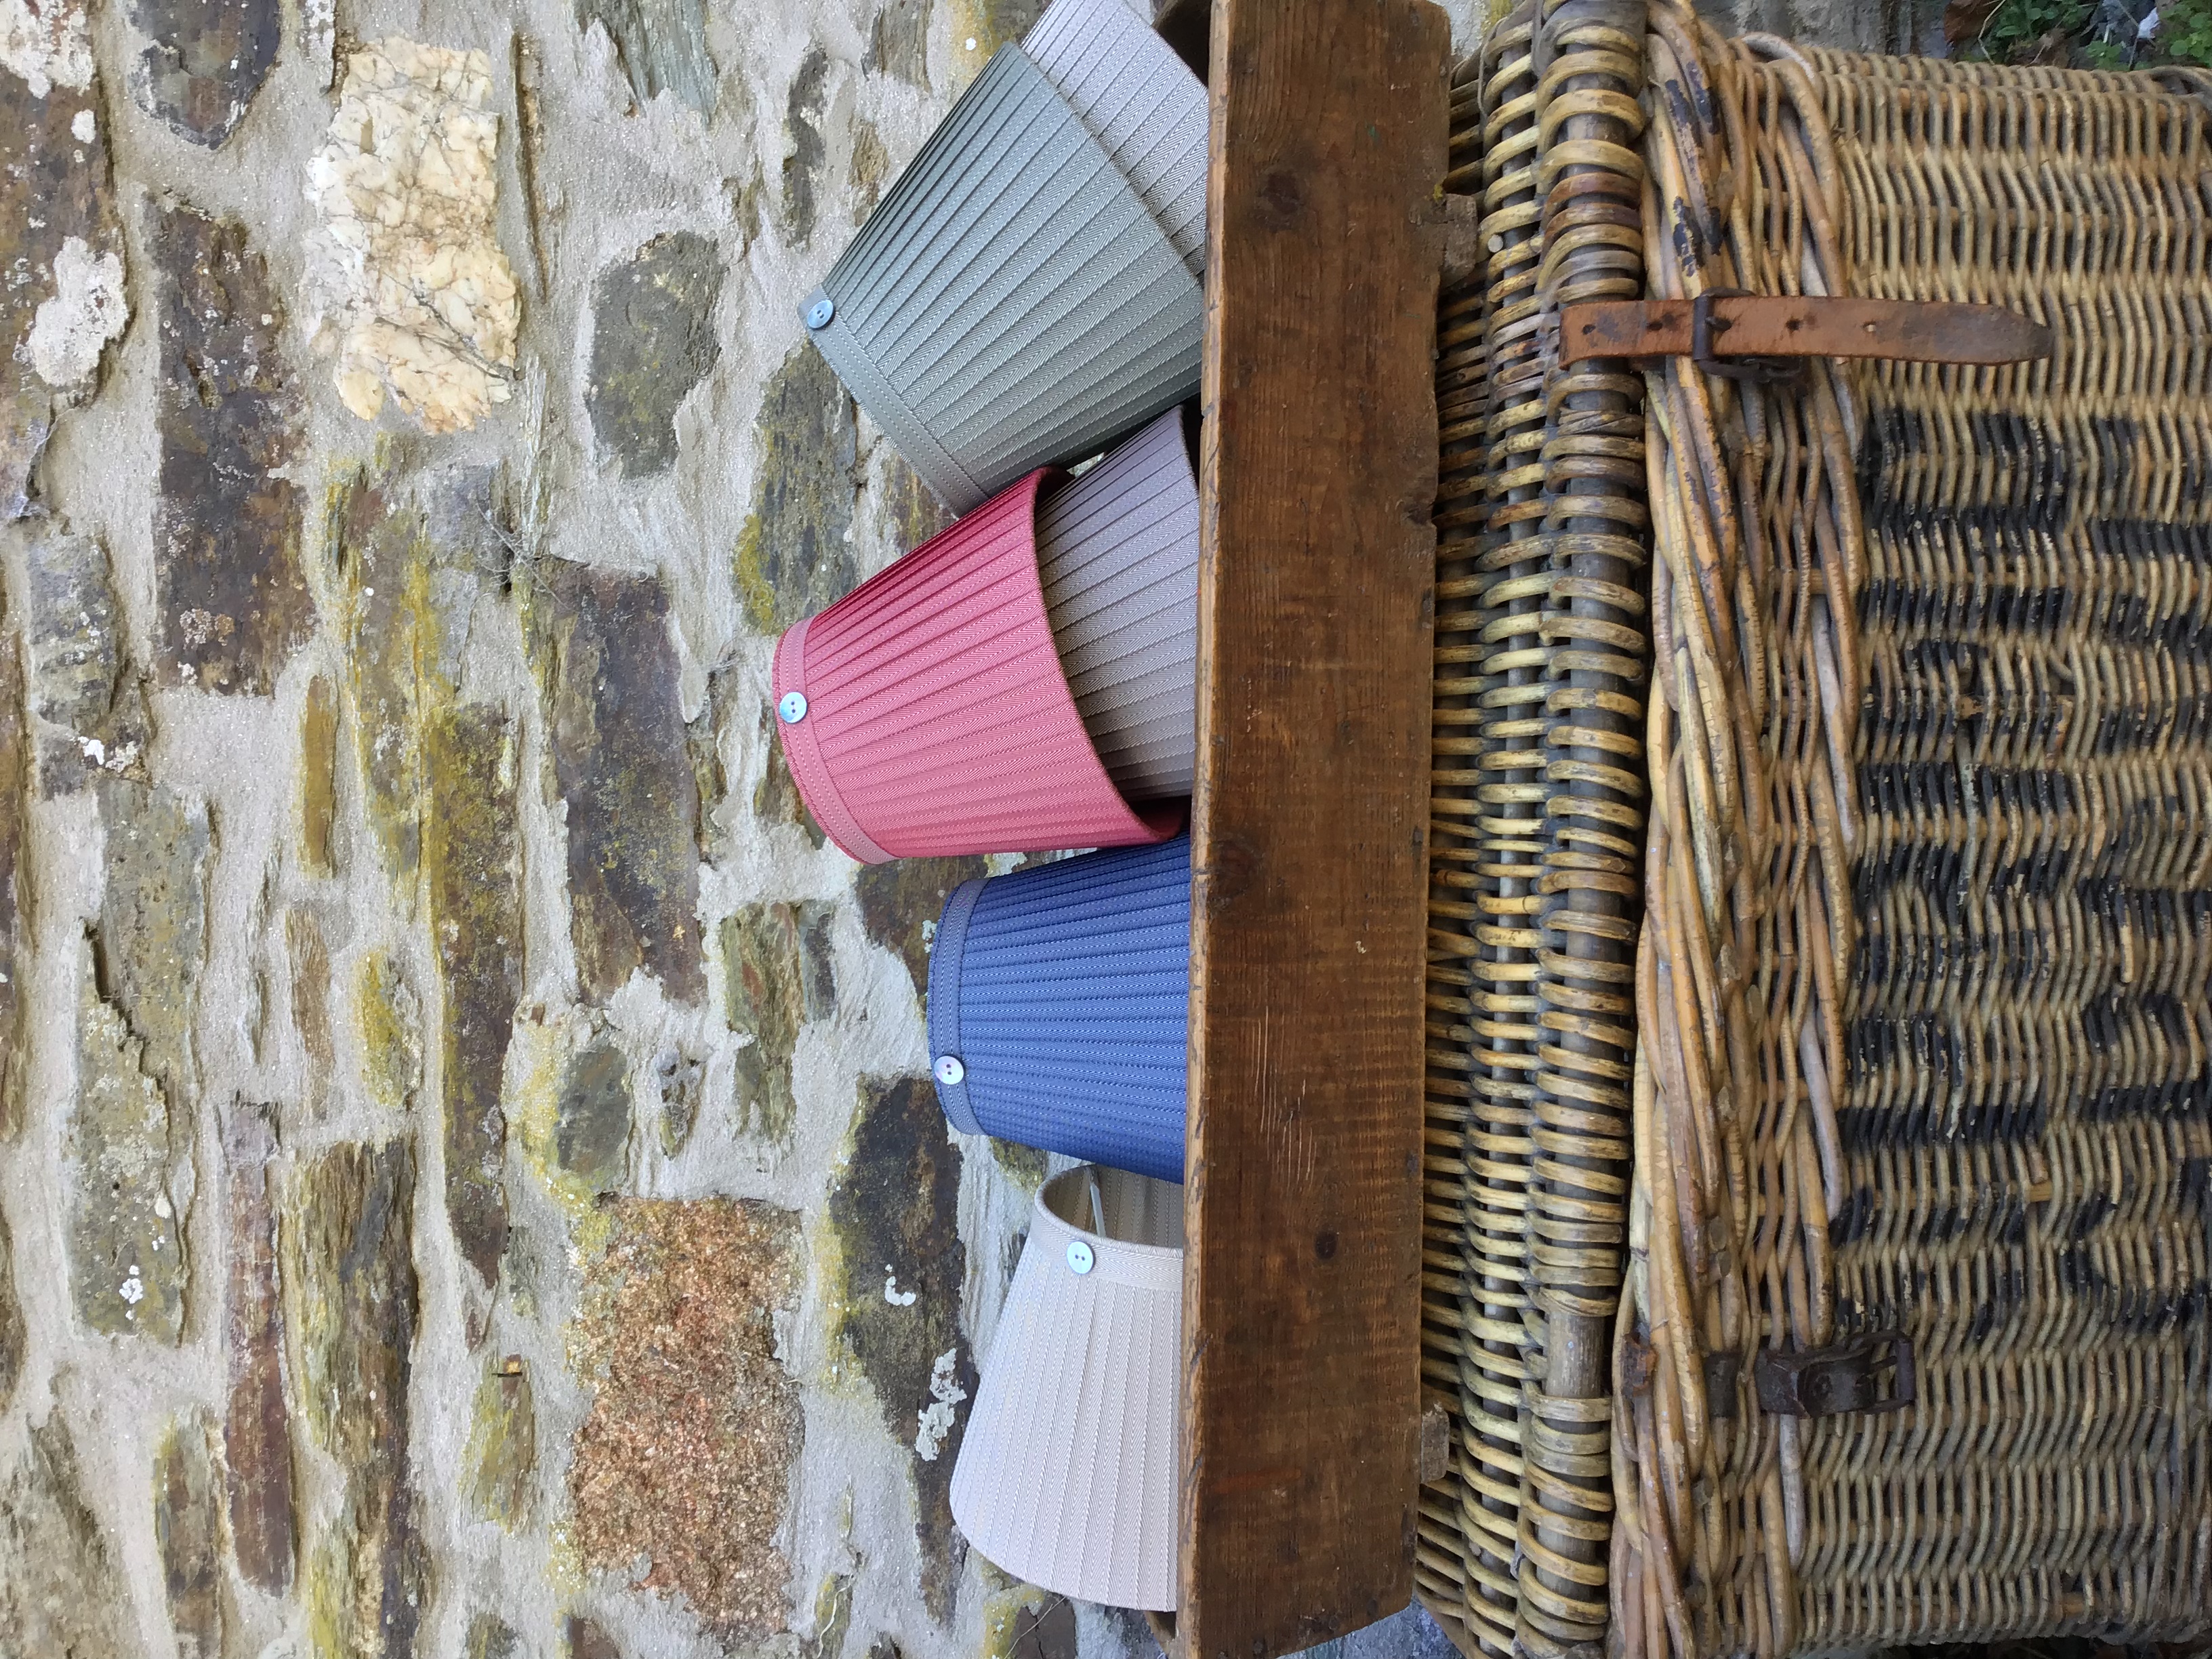 Barrington Ribbon Lampshades in wooden trough on basket